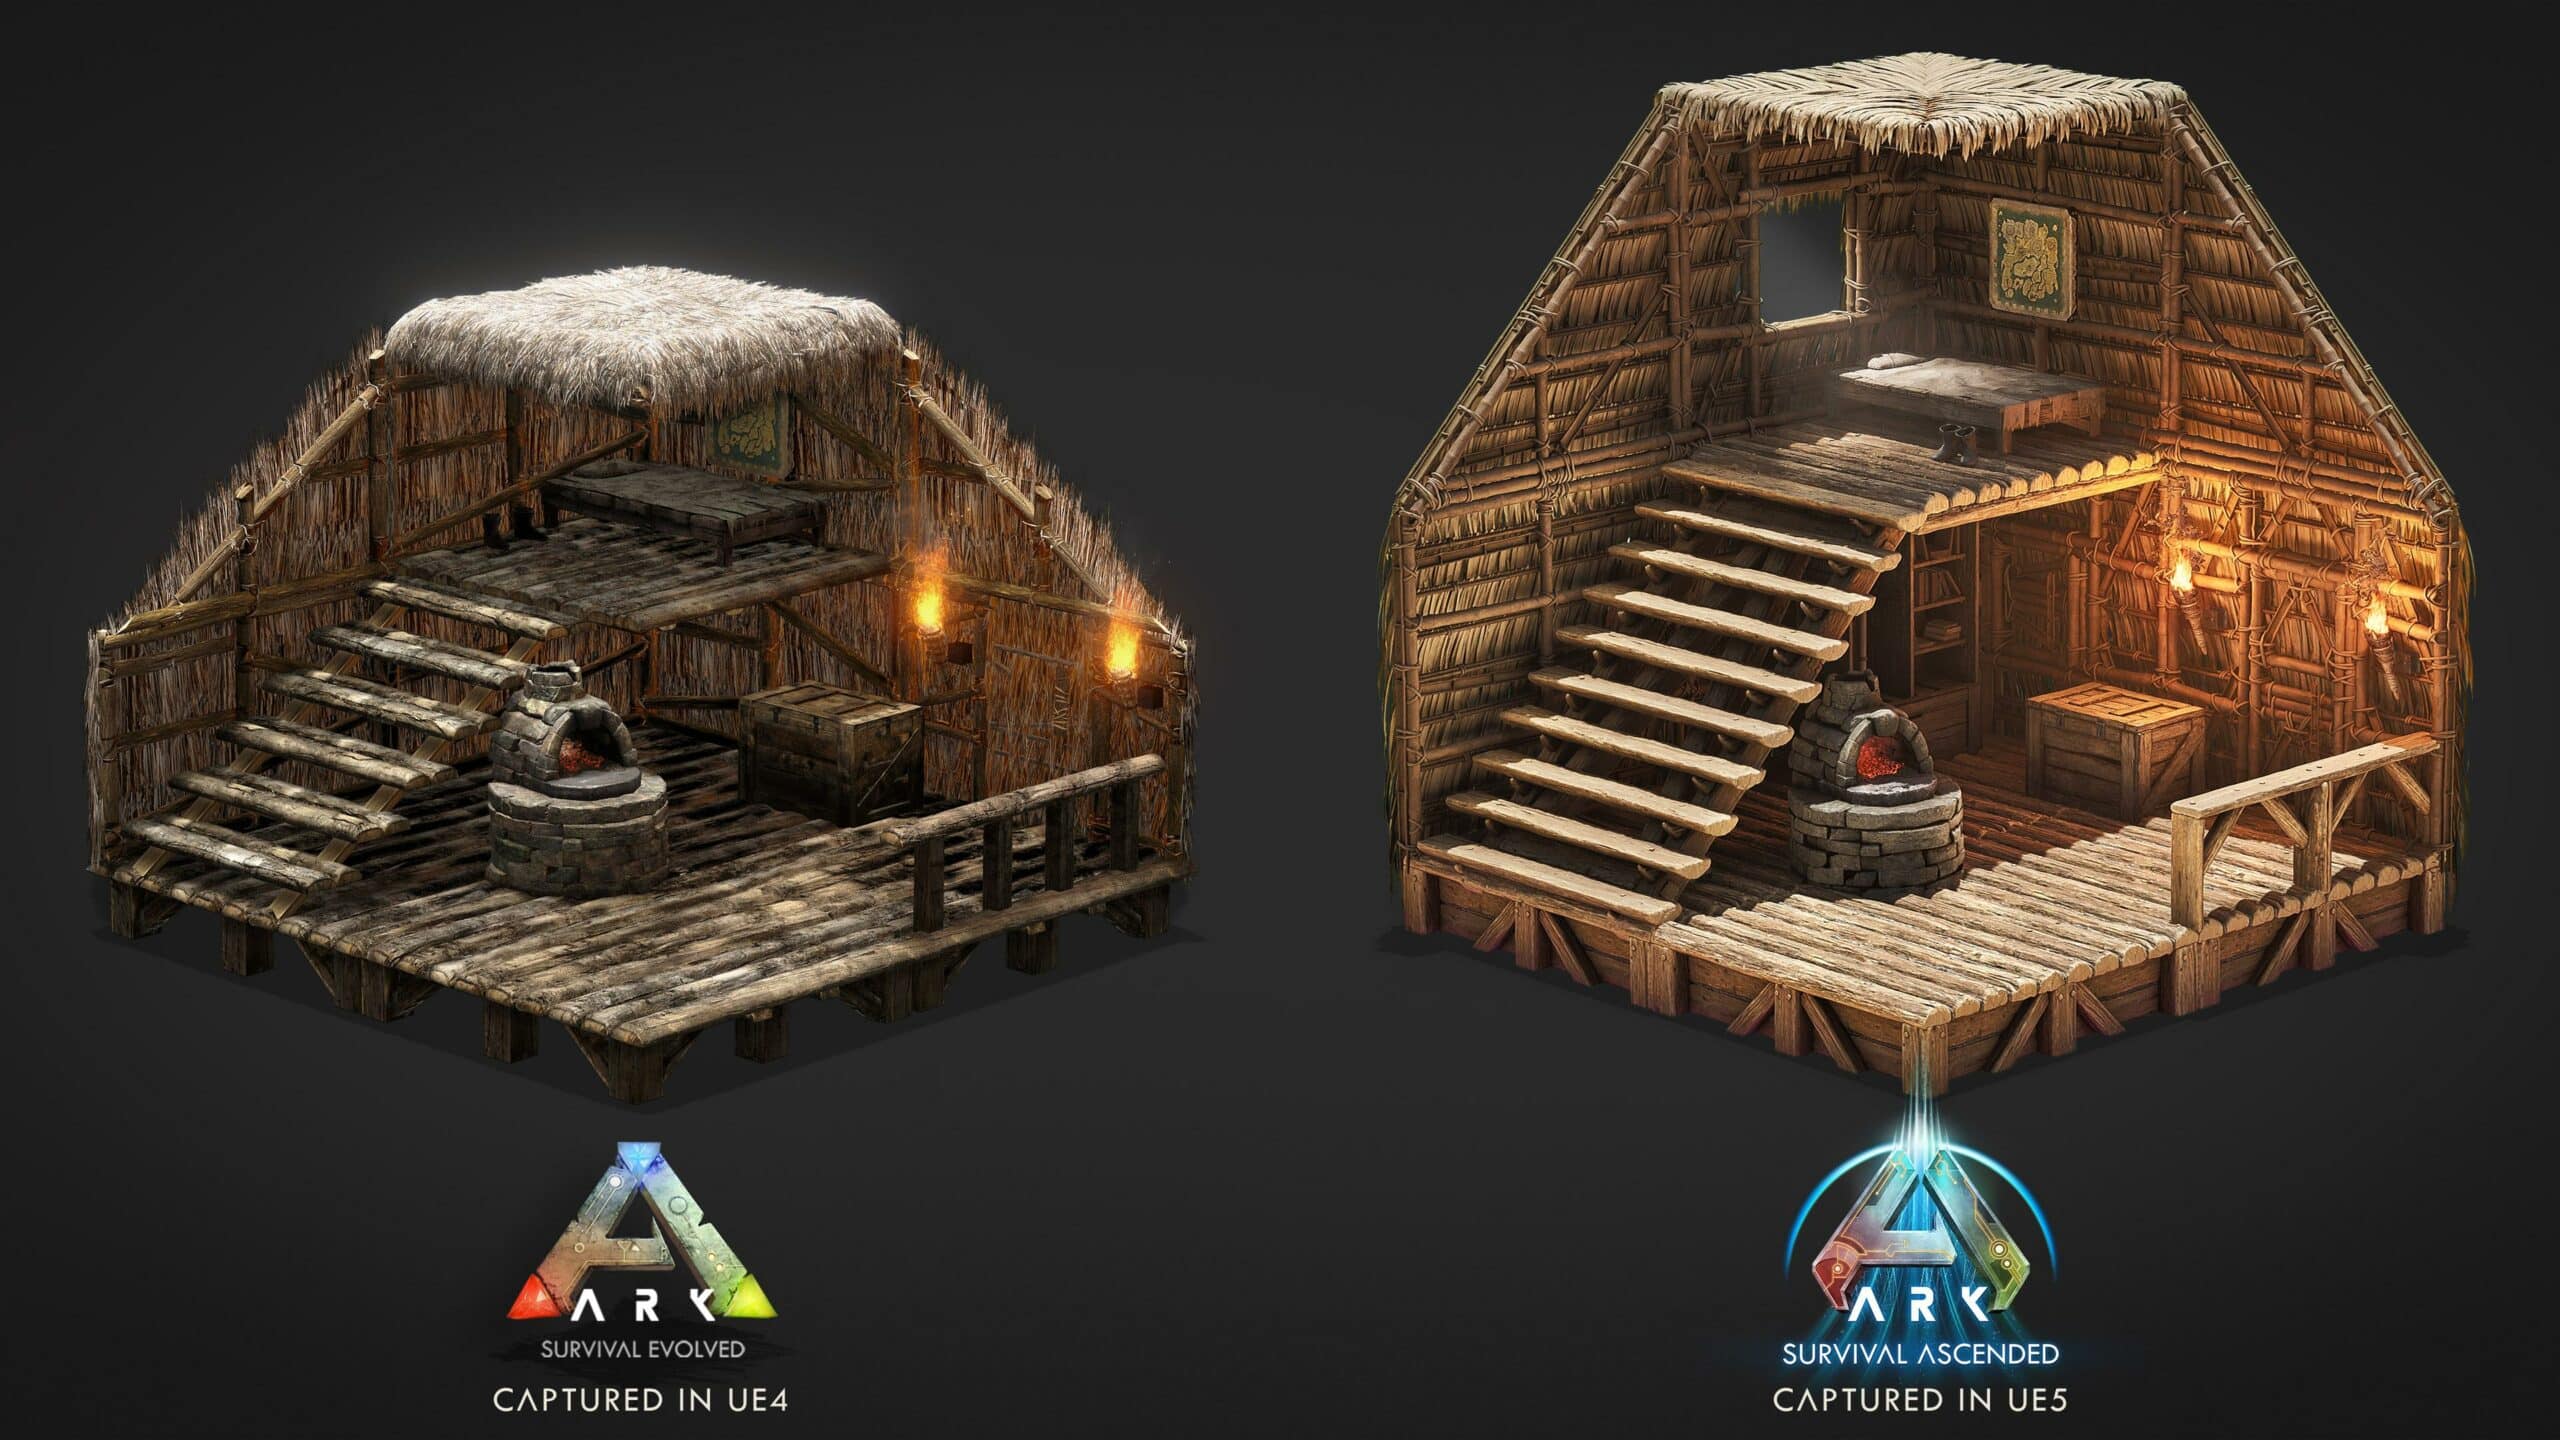 How long is ARK: Survival Ascended?